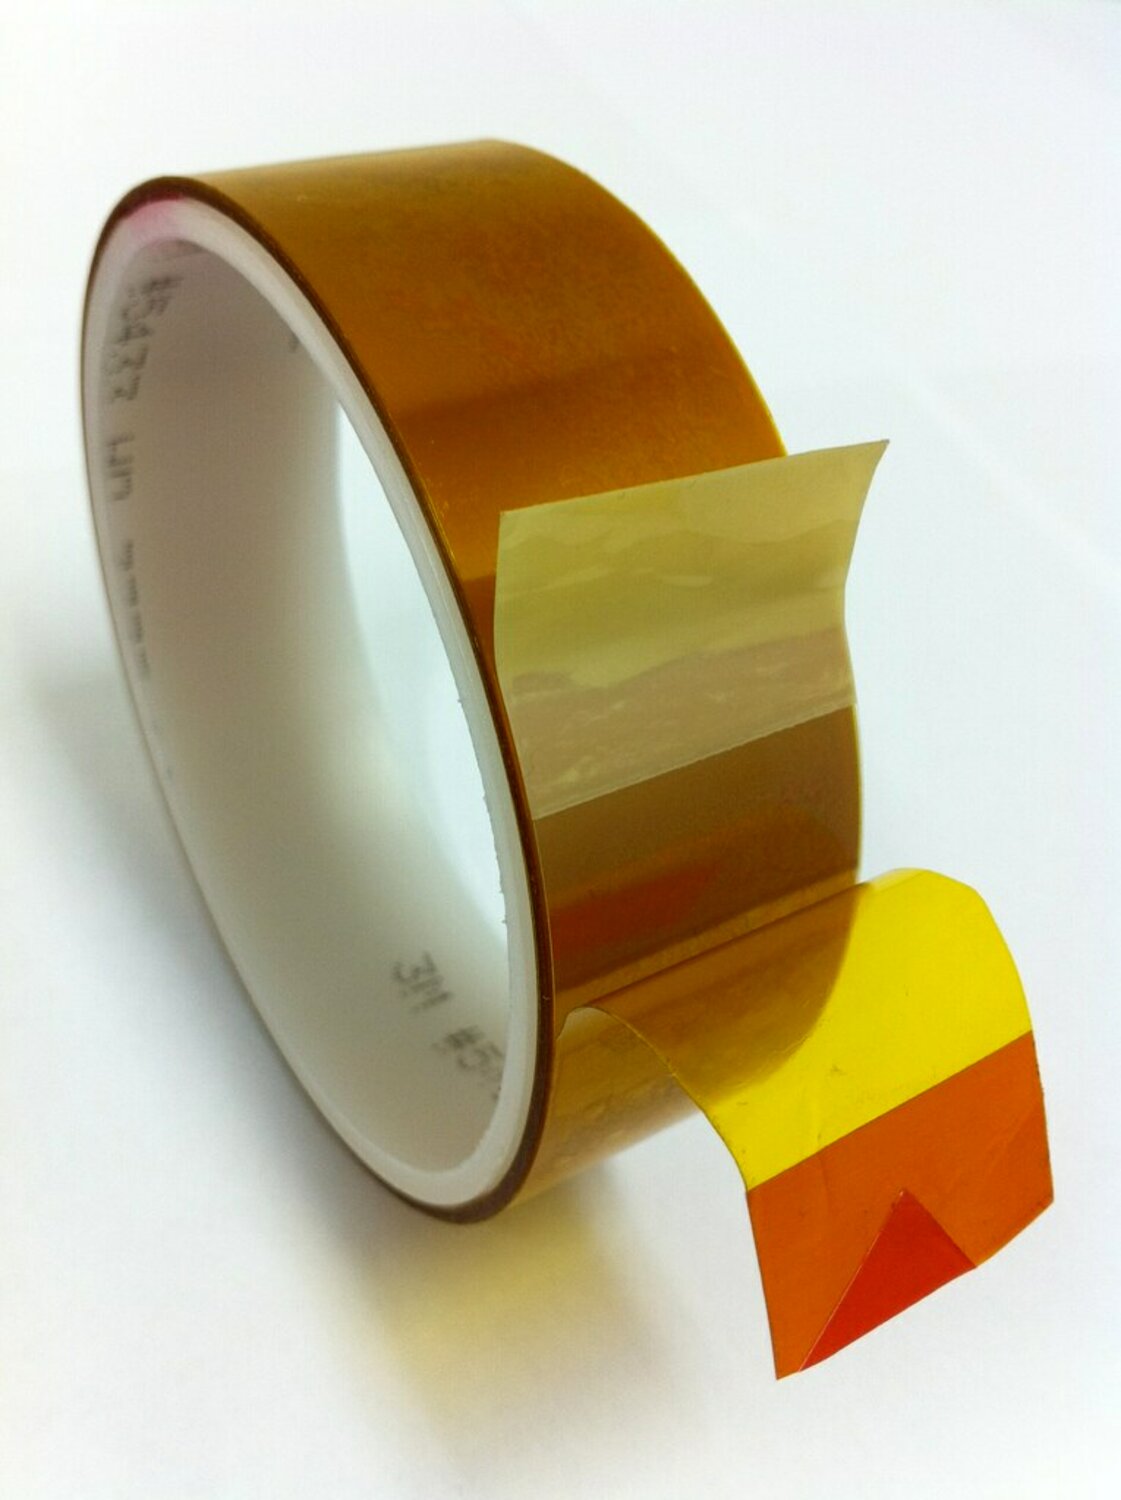 7010334225 - 3M Linered Low-Static Polyimide Film Tape 5433 Amber, 1 in x 36 yds x
2.7 mil, 9/Case, Bulk